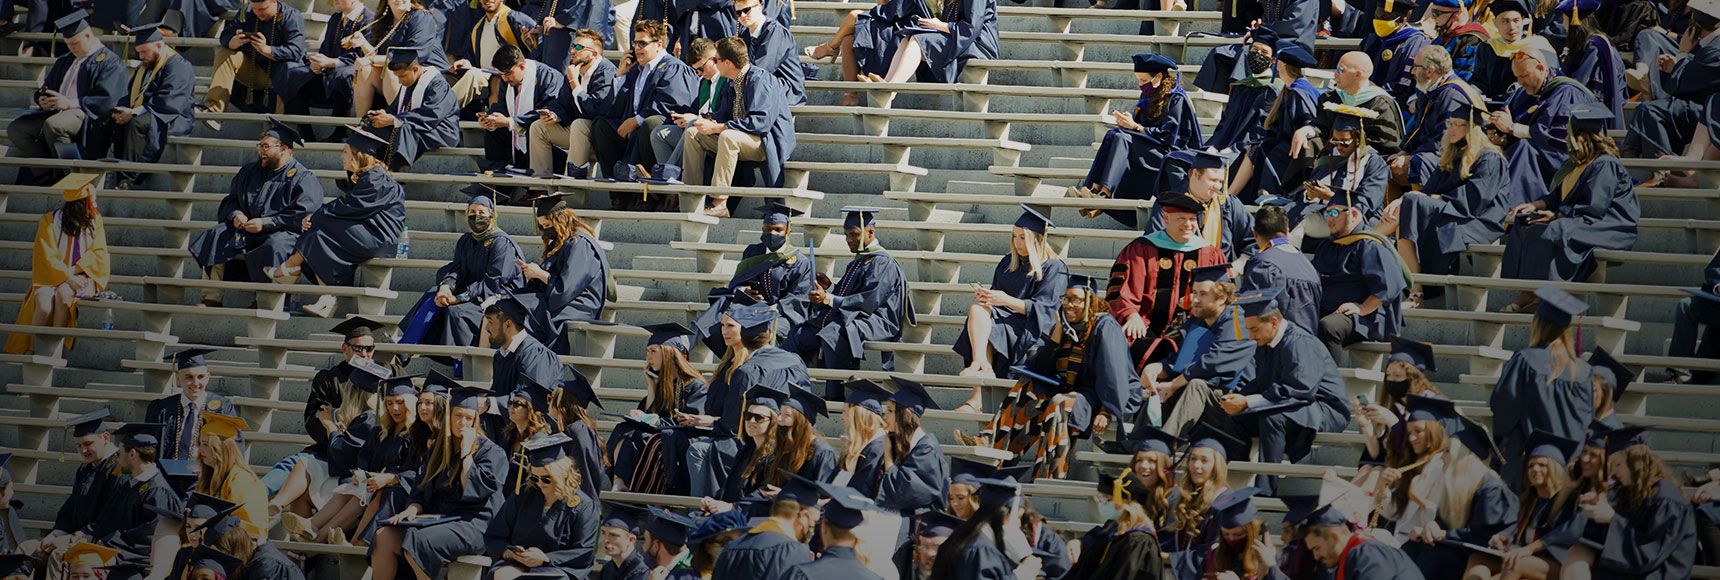 Graduated students watch commencement ceremony from the stands of mountaineer field